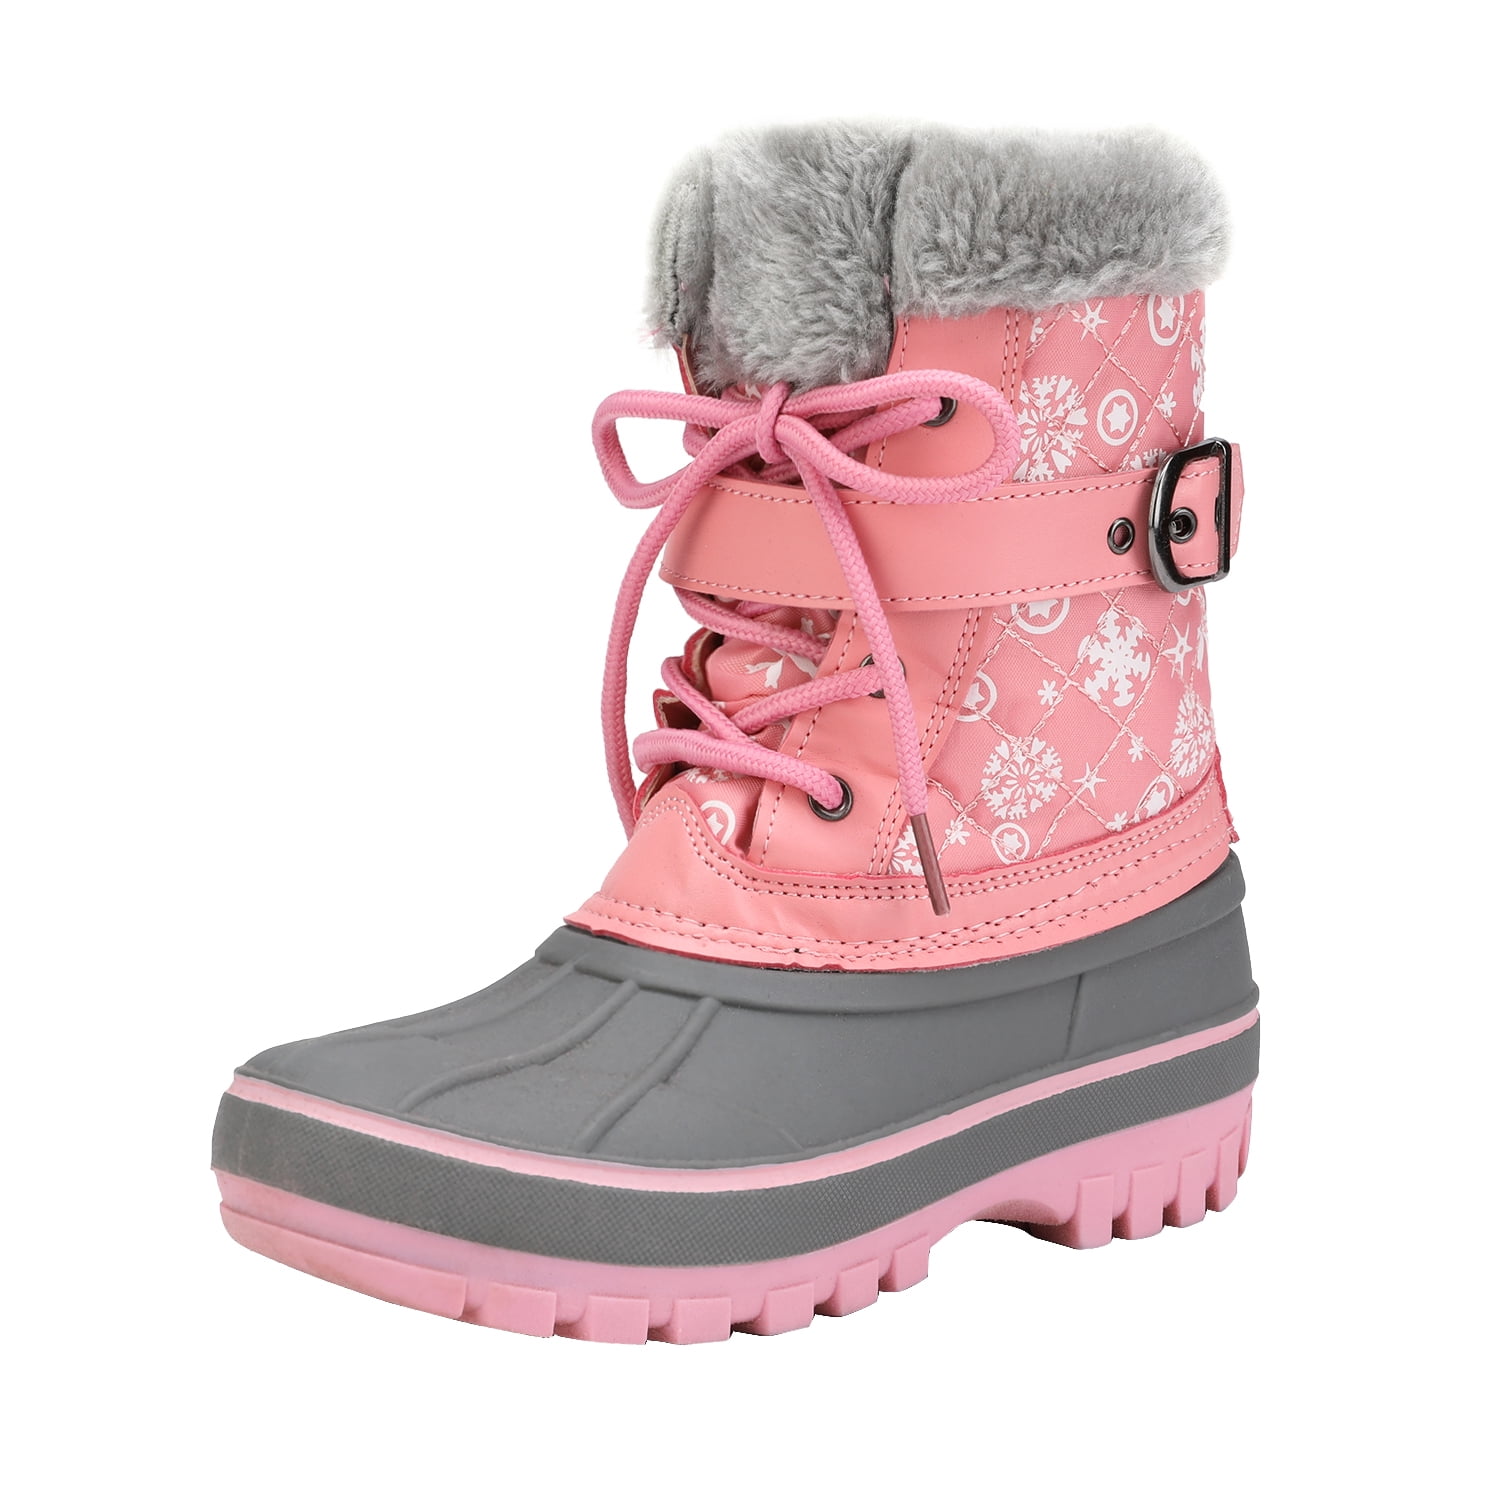 DREAM PAIRS Boys Girls Mid Calf Insulated Waterproof Winter Snow Boots（Toddler/Little Kid/Big Kid）